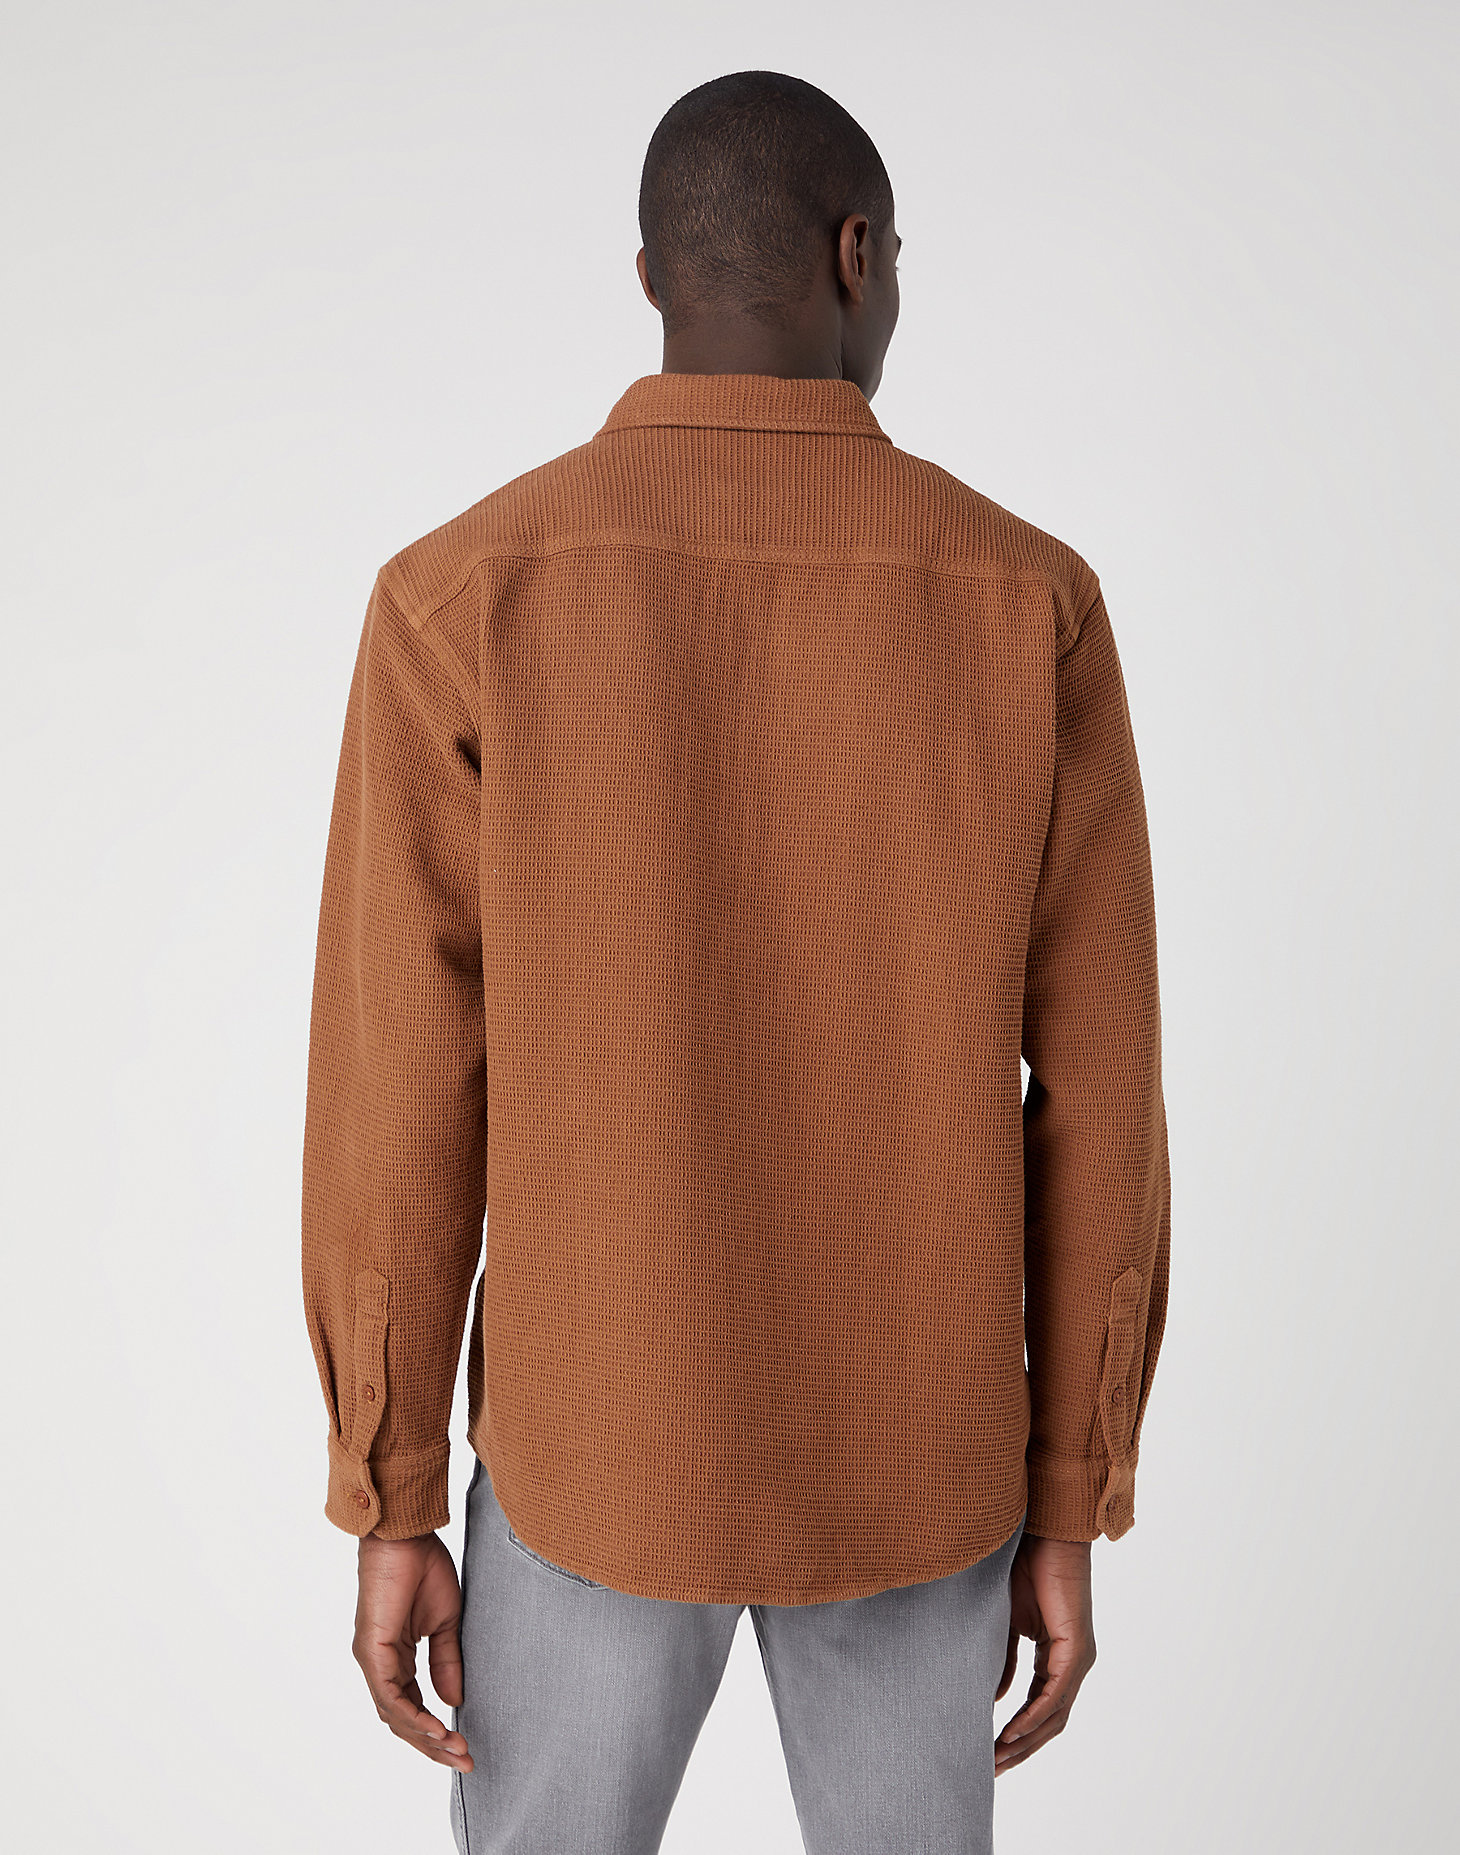 Overshirt in Toffee alternative view 2